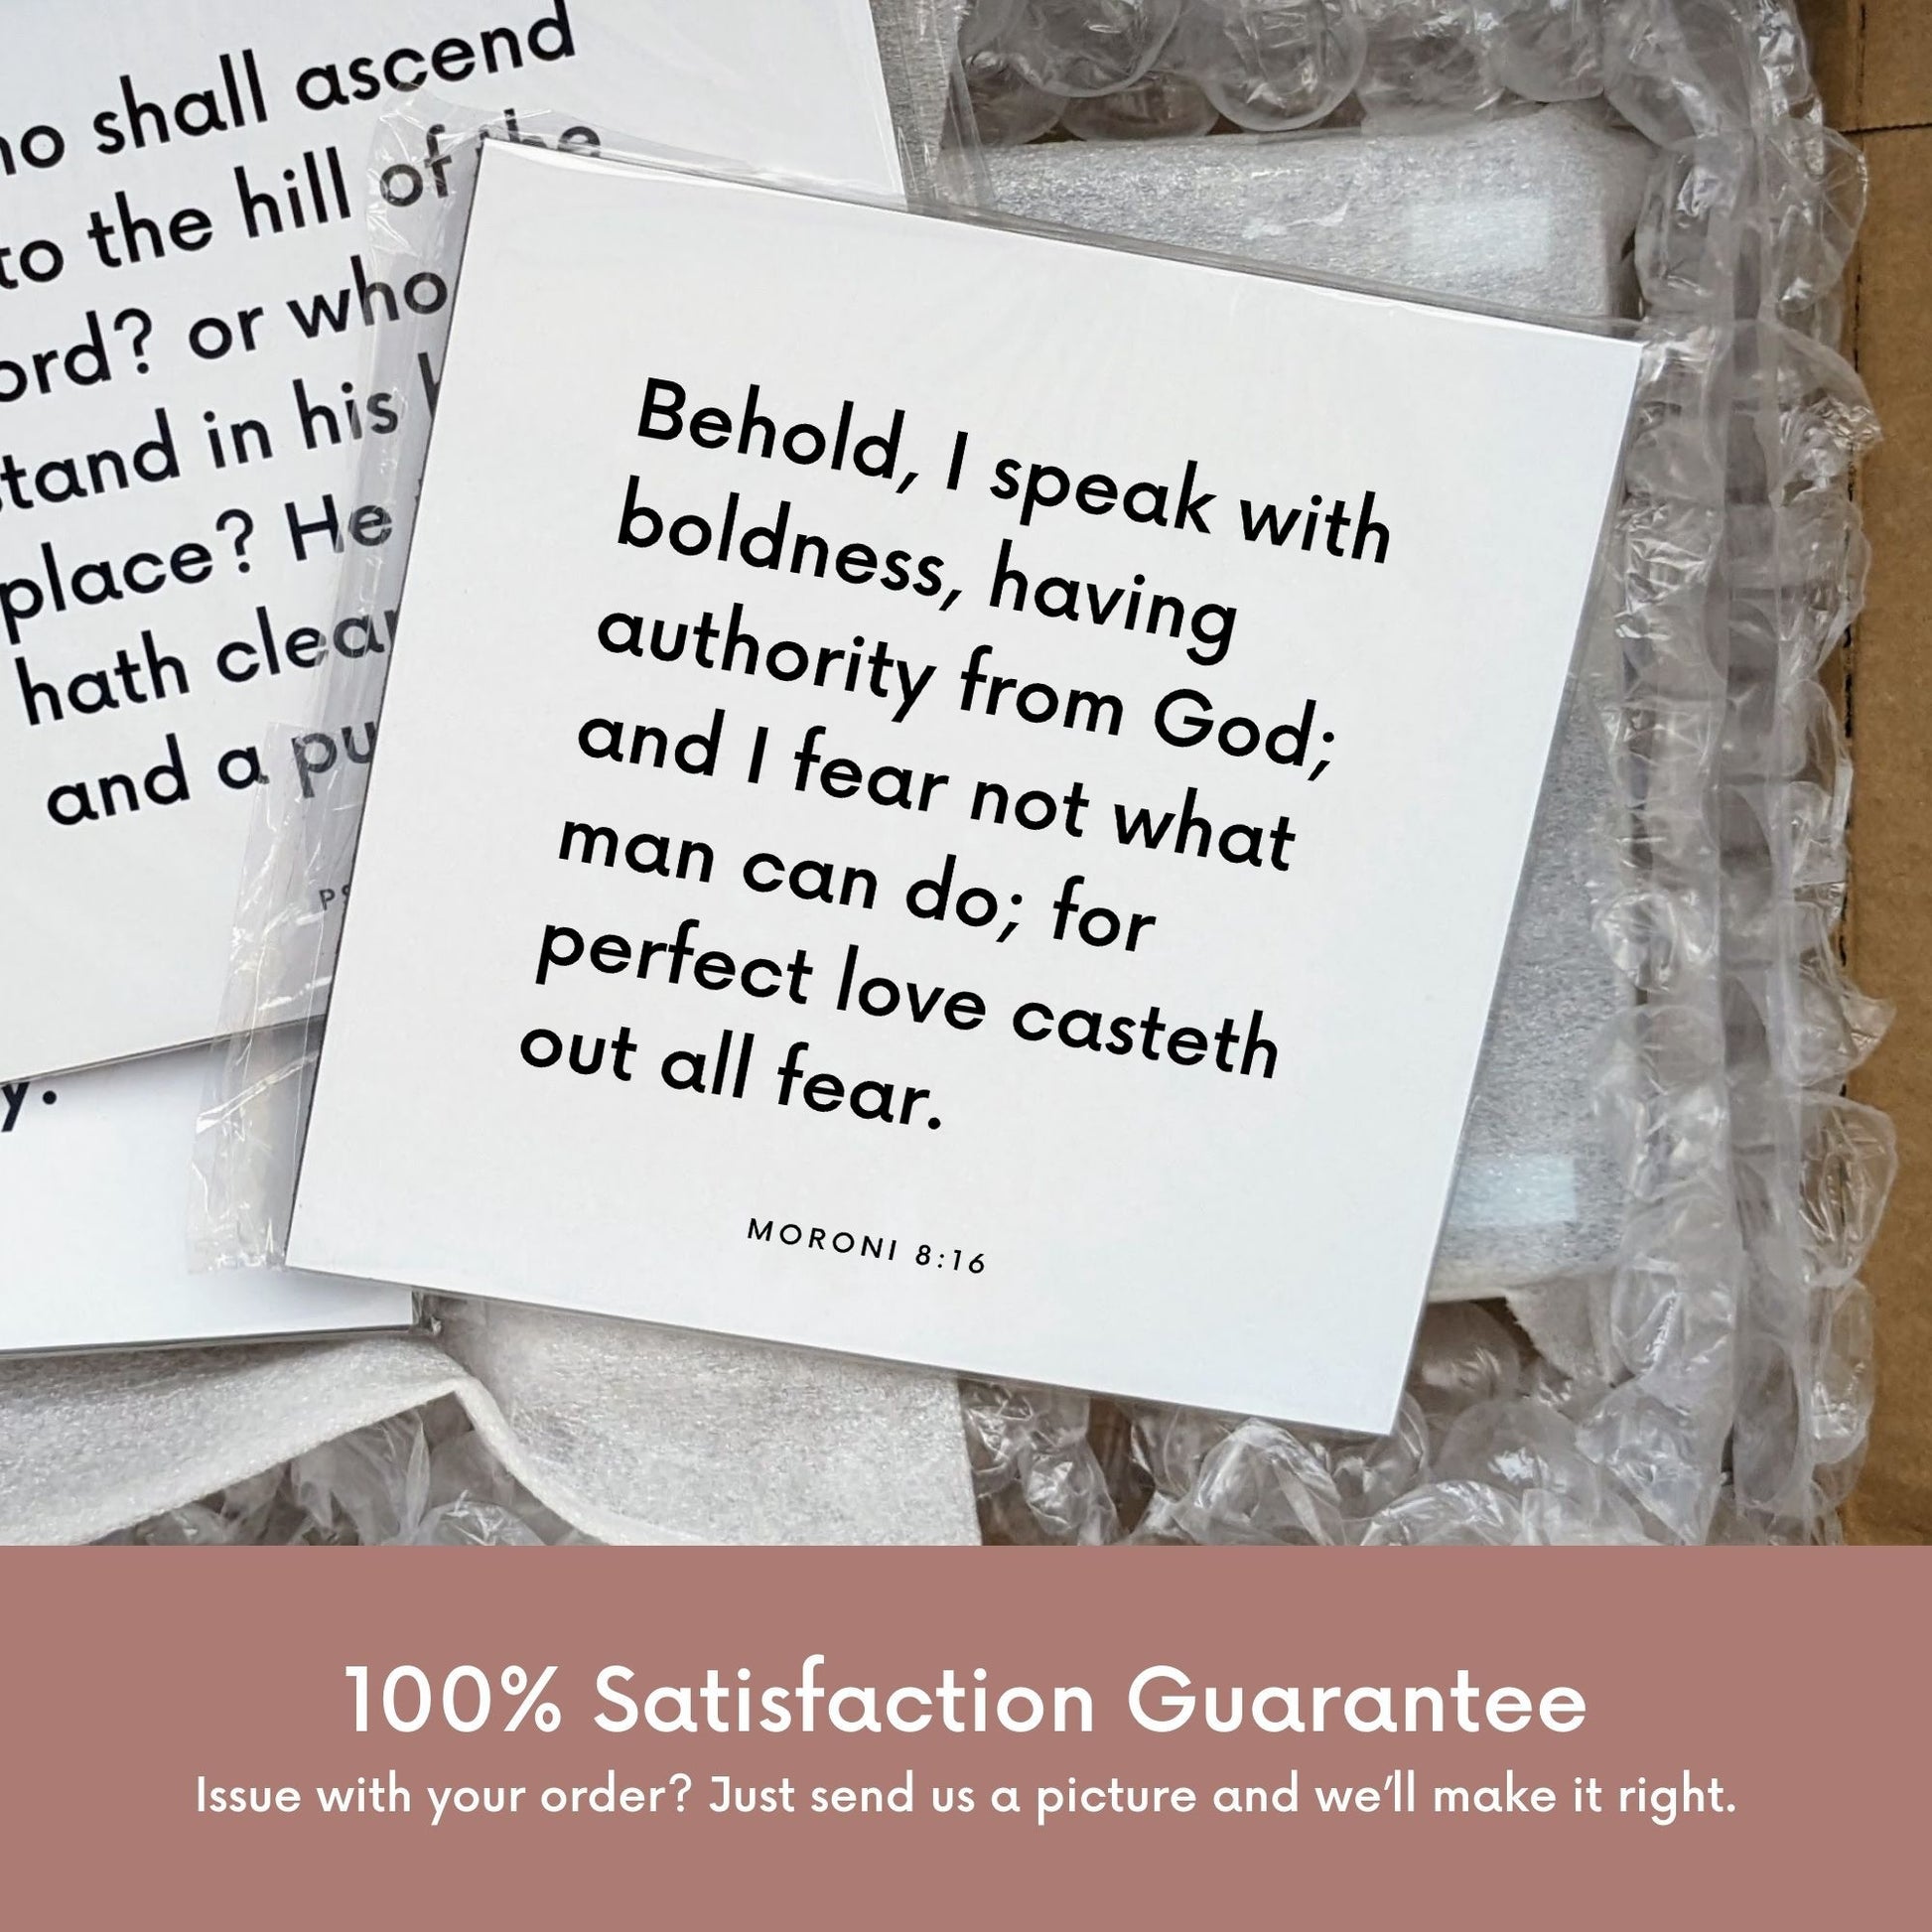 Shipping materials for scripture tile of Moroni 8:16 - "Behold, I speak with boldness, having authority from God"